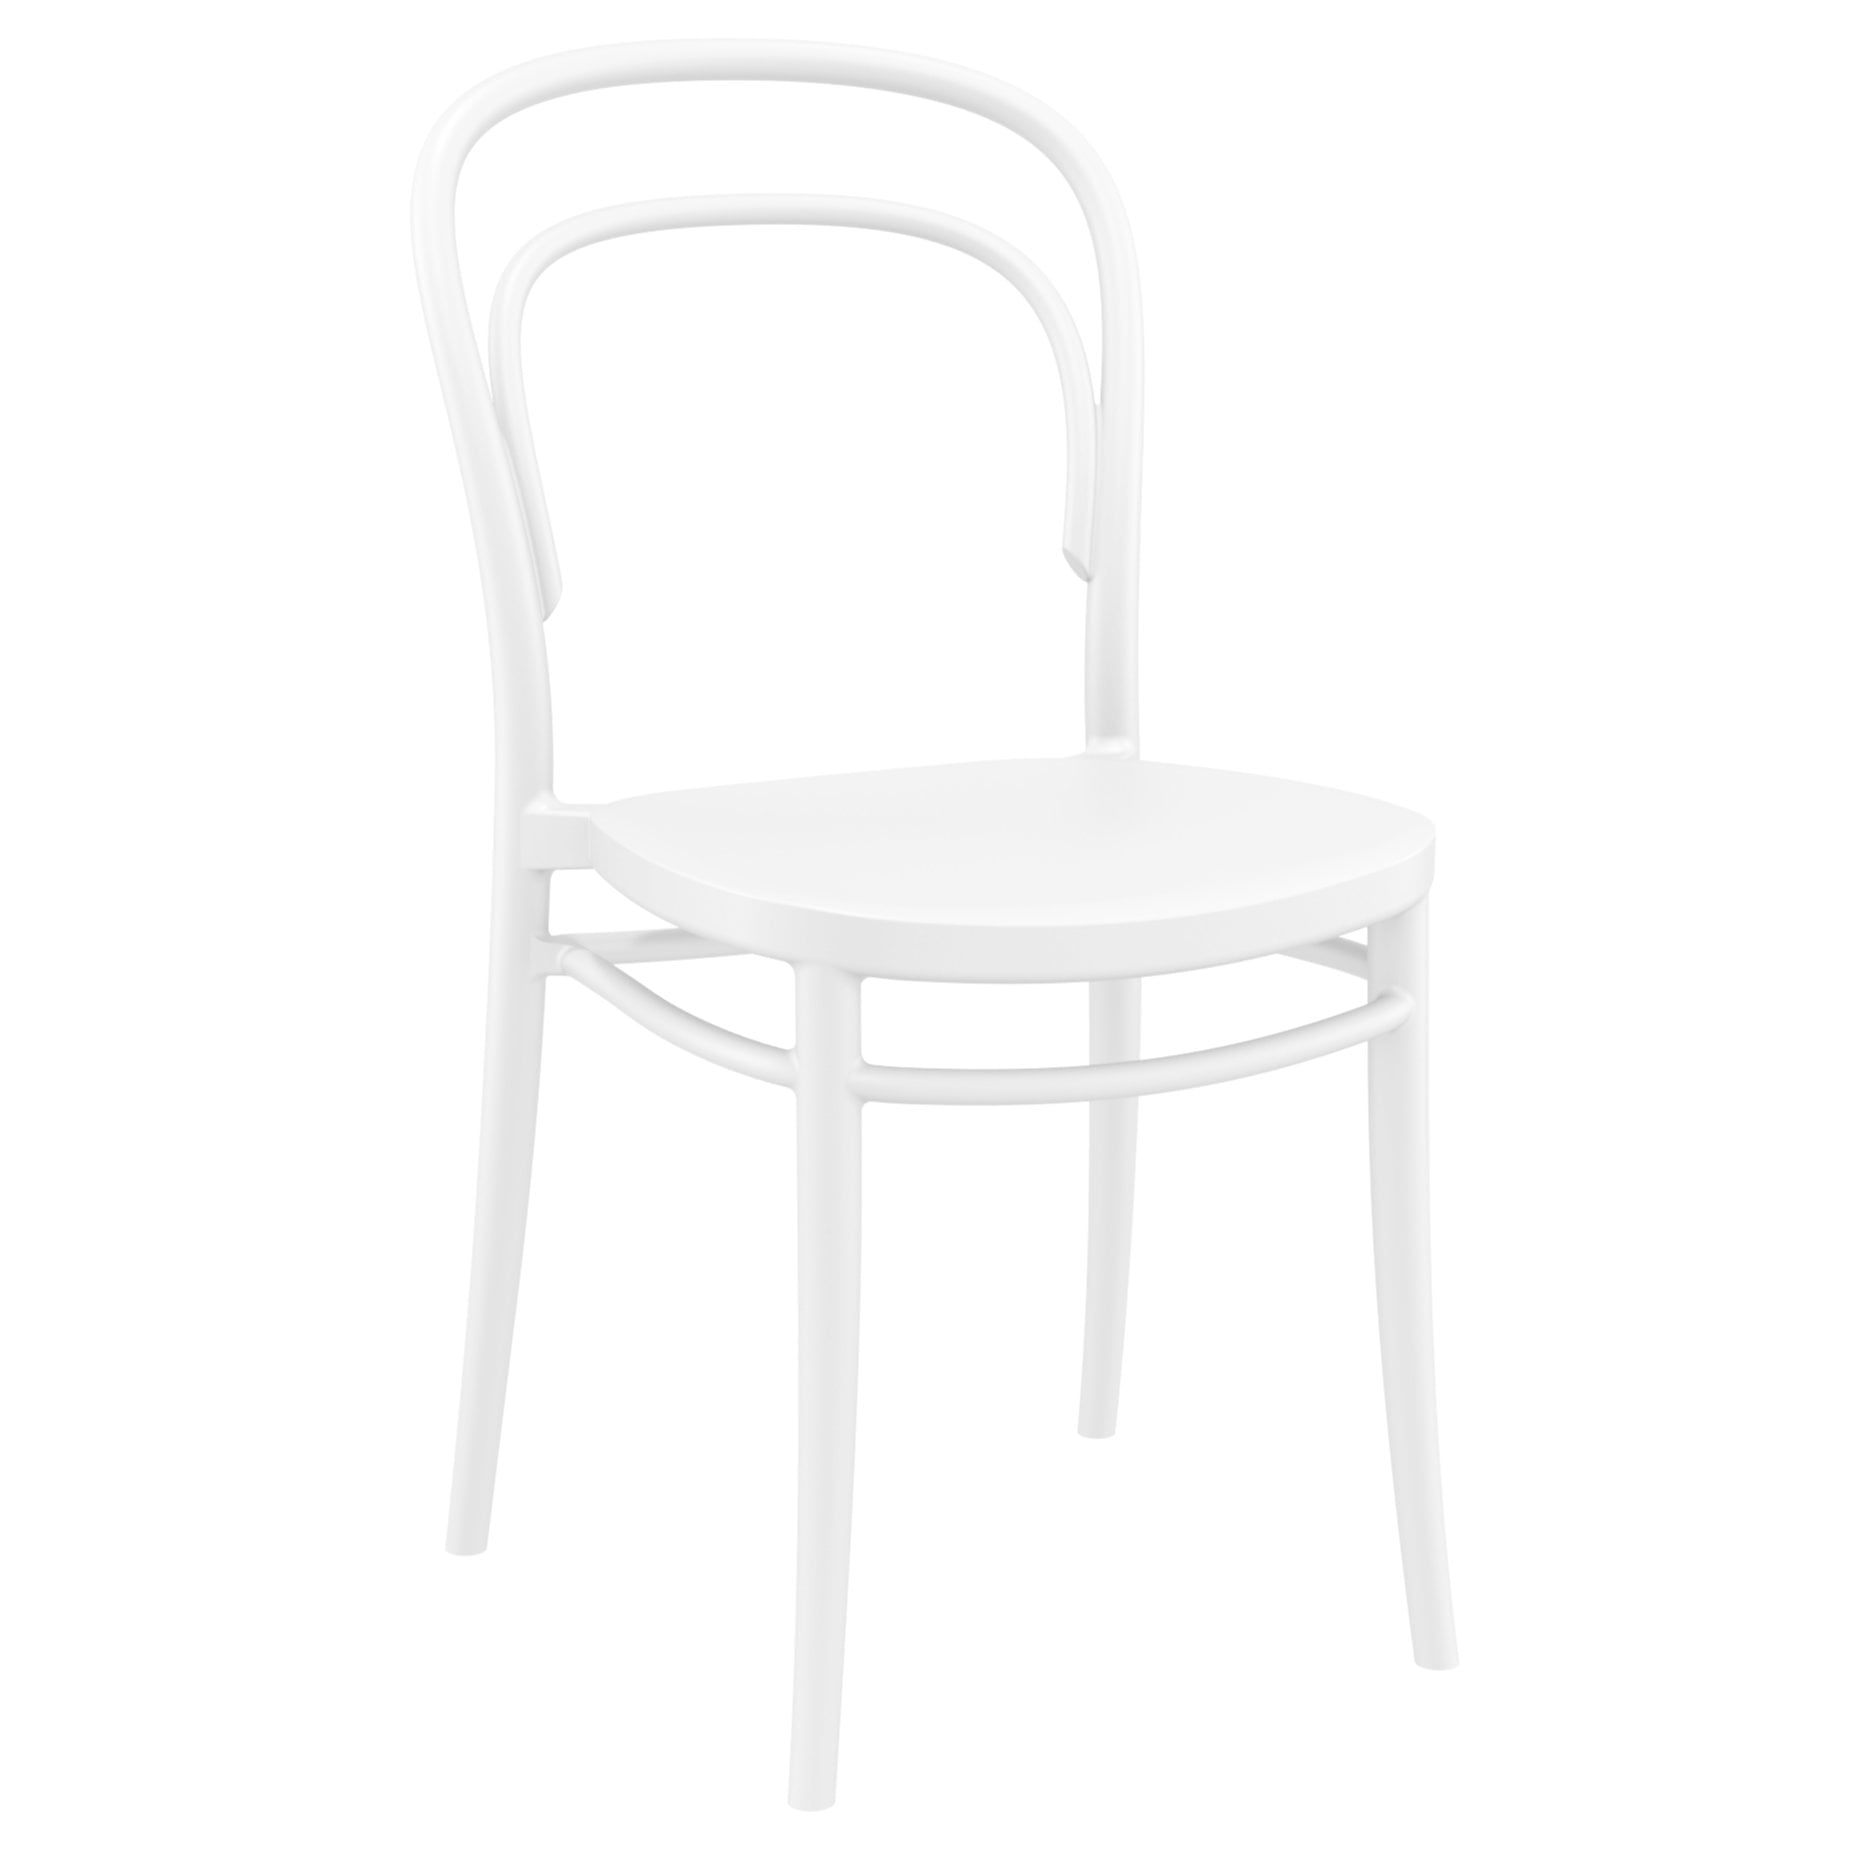 Isp251-whi Marie Resin Outdoor Chair, White